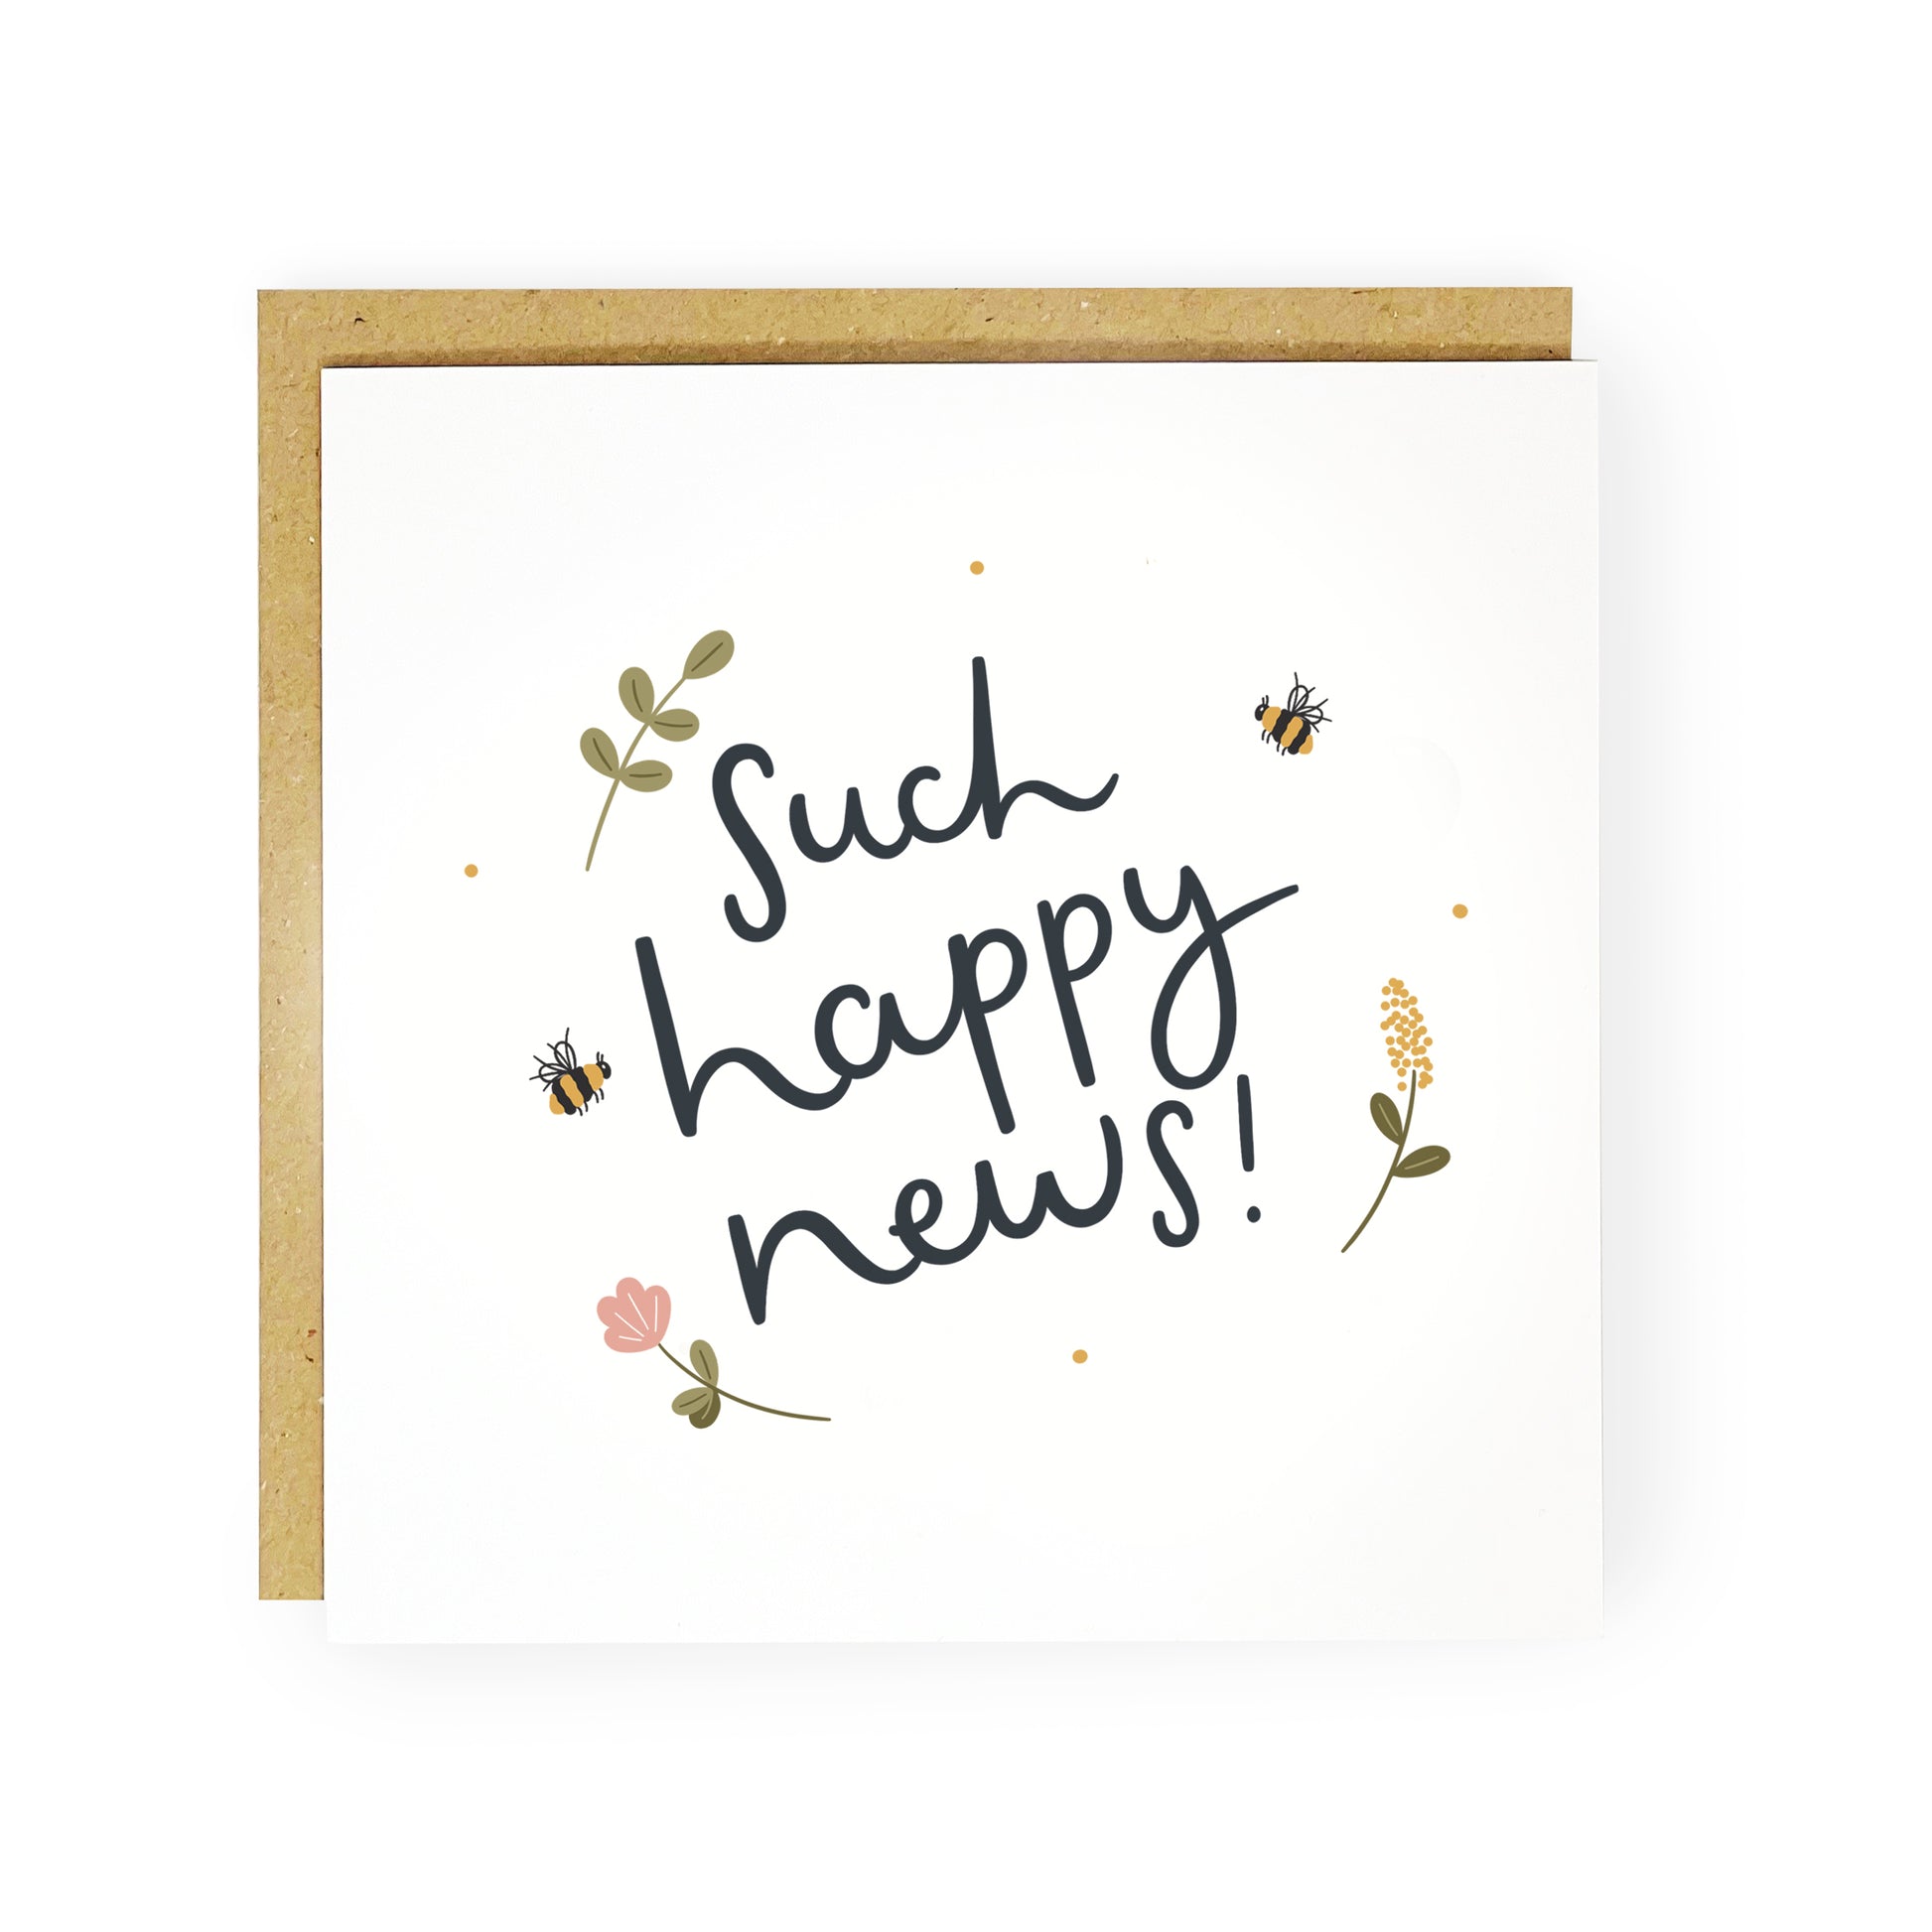 Such happy news congratulations card for new baby or engagement by abbie imagine